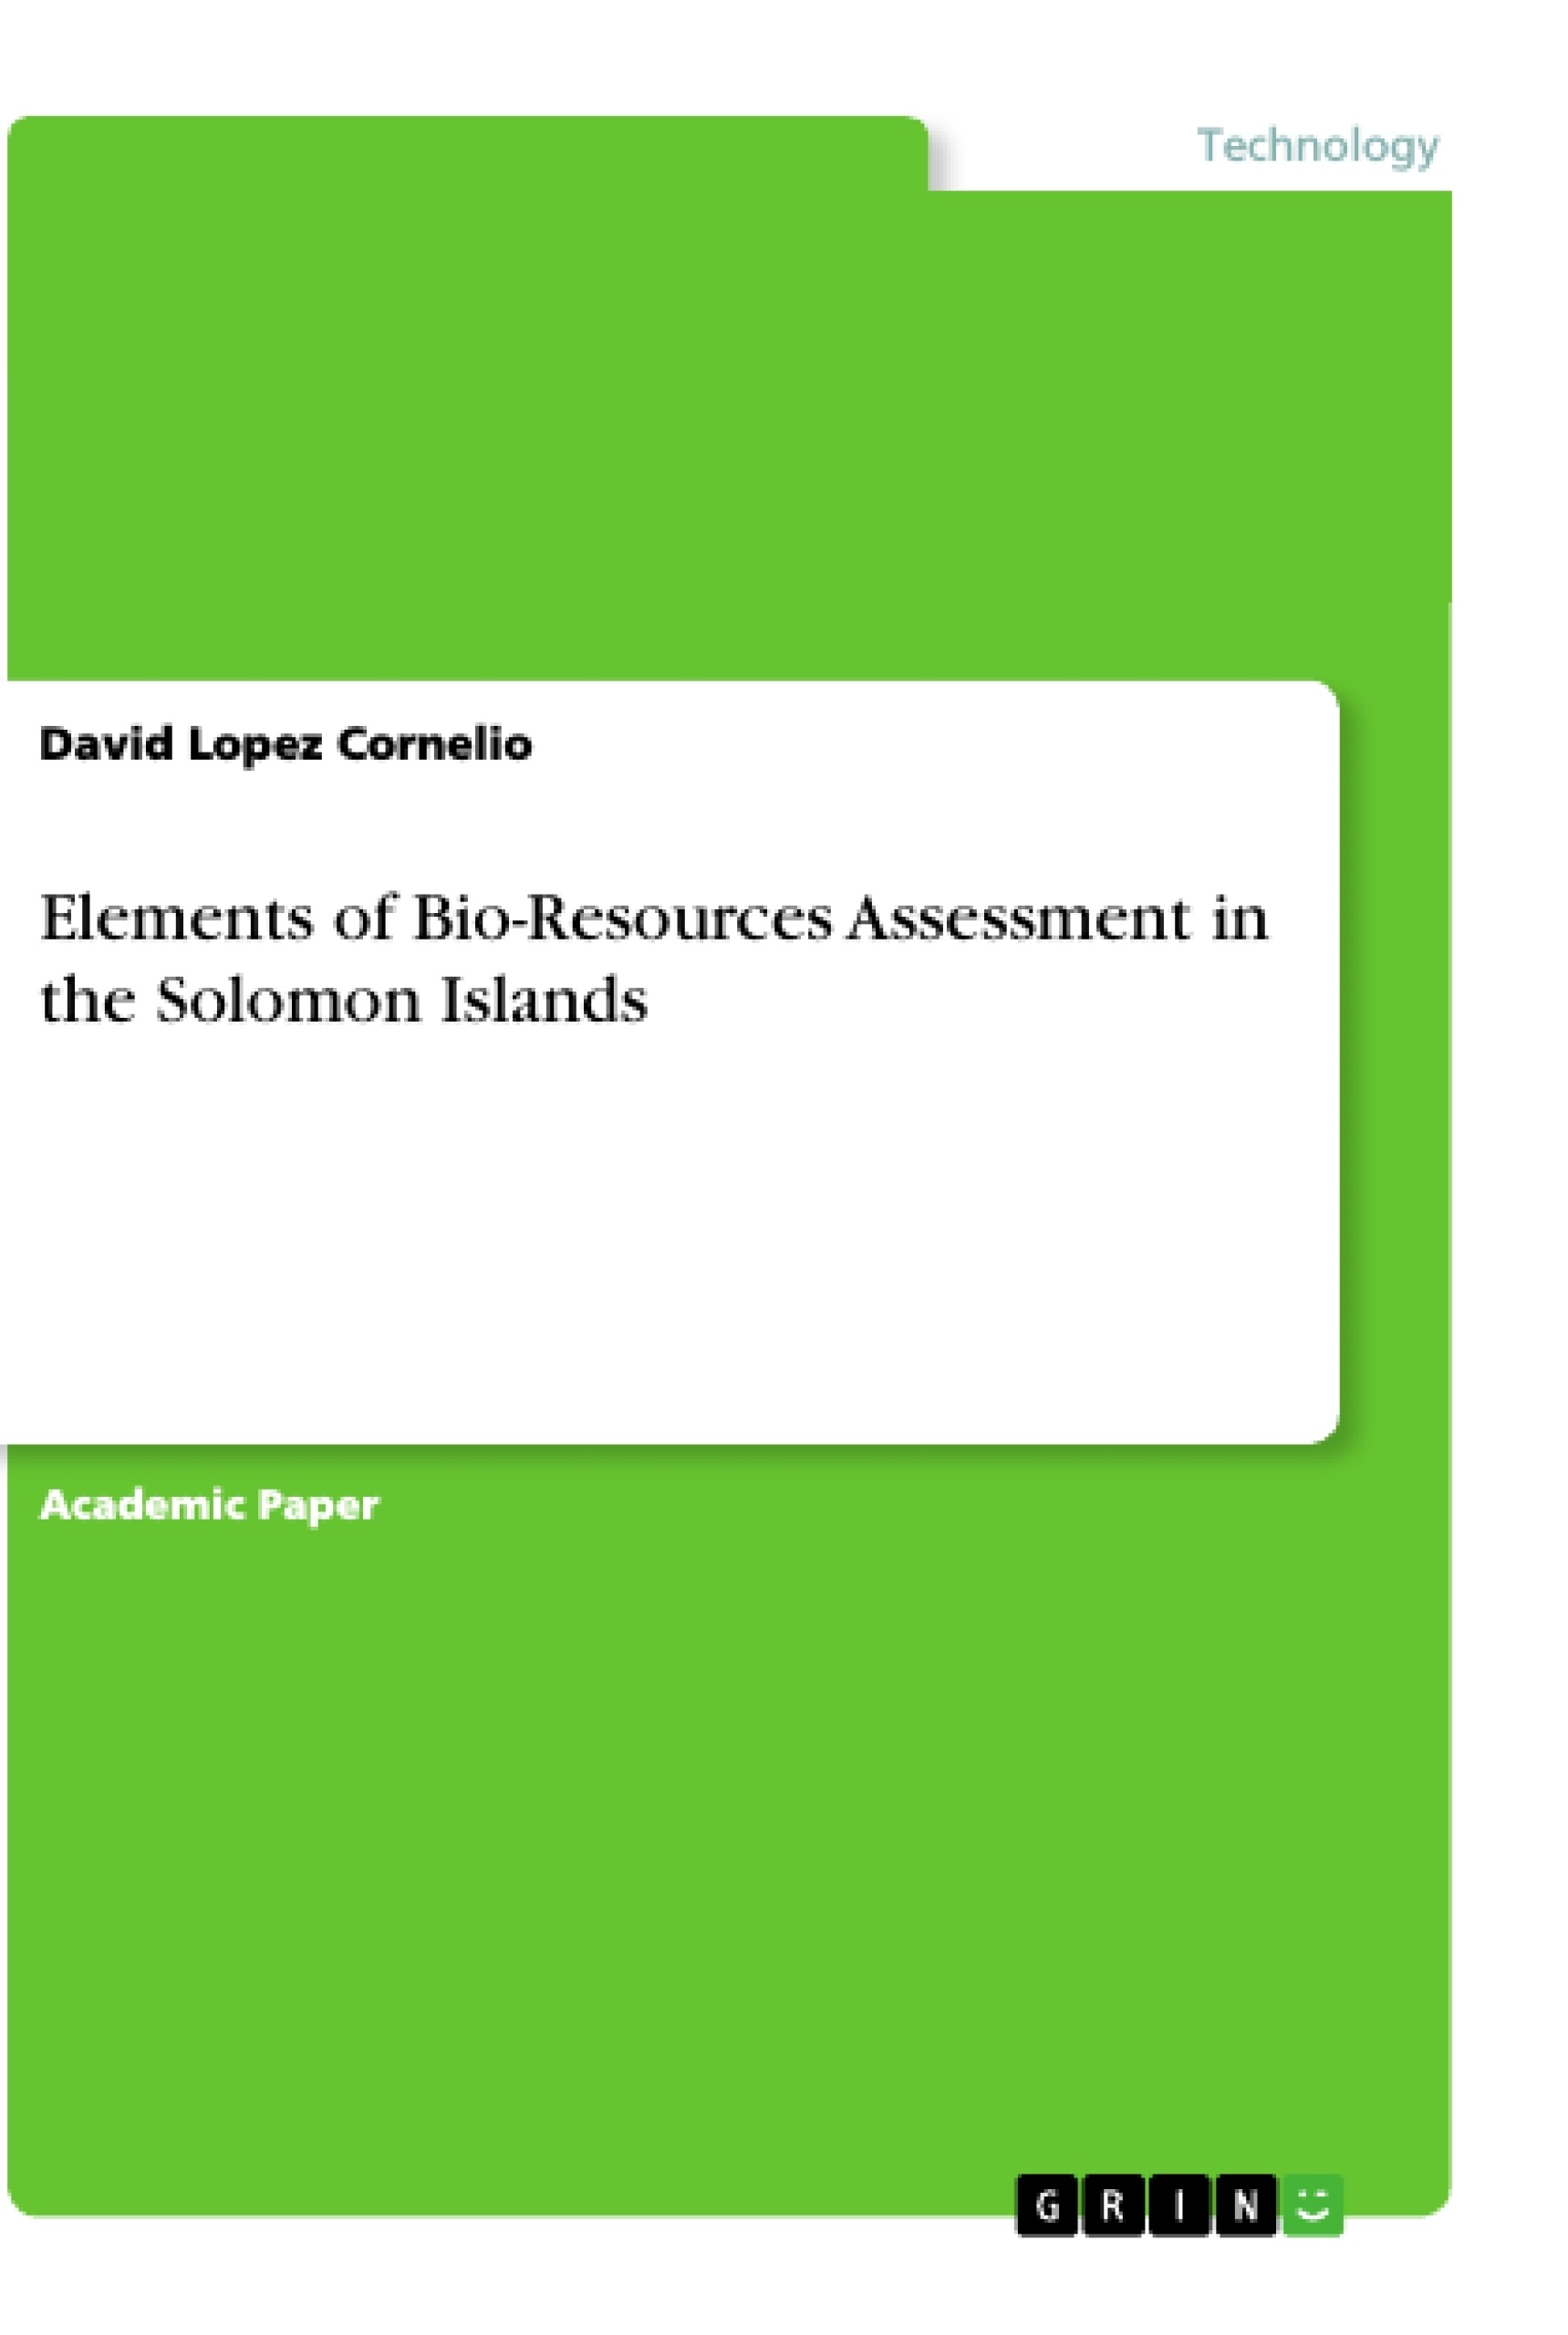 Title: Elements of Bio-Resources Assessment in the Solomon Islands